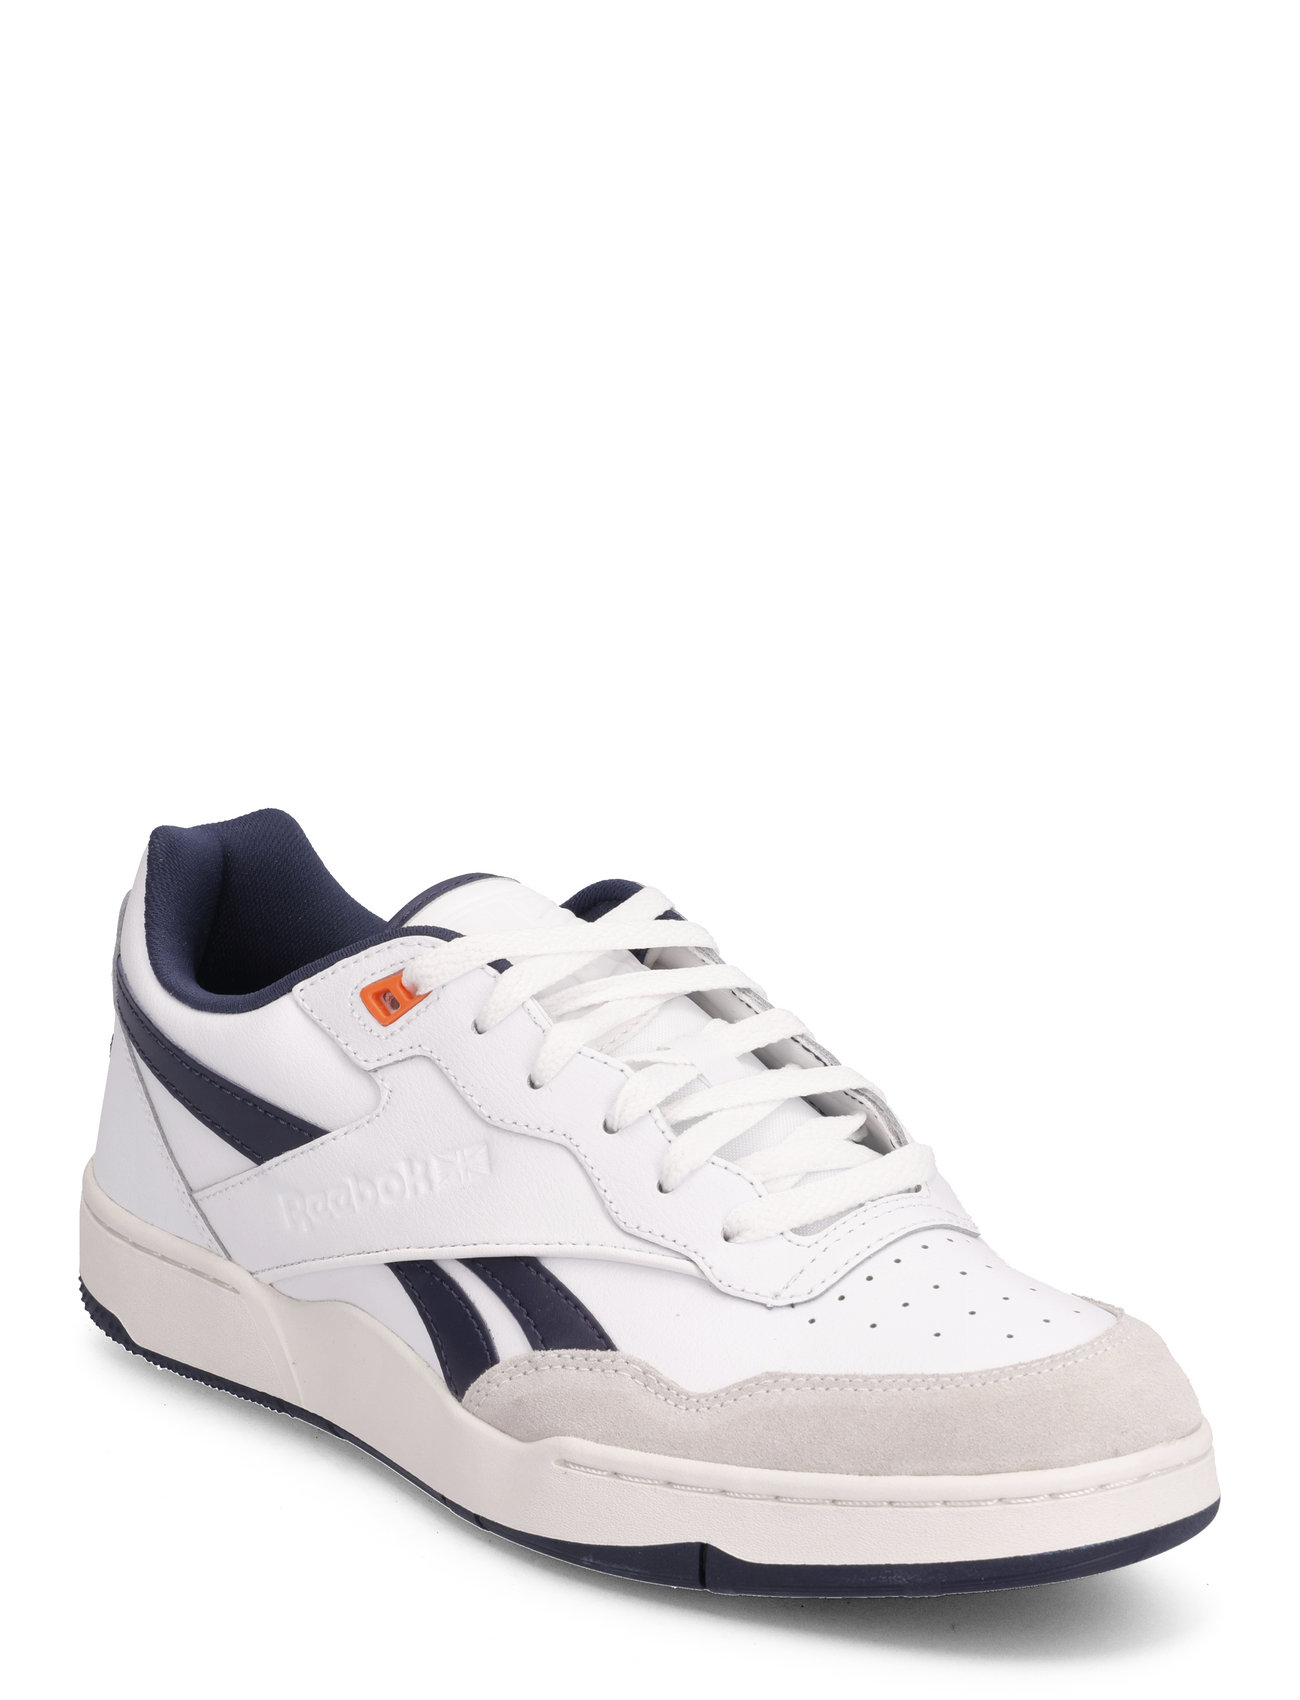 Bb 4000 Shoes Lave sneakers | Boozt.com